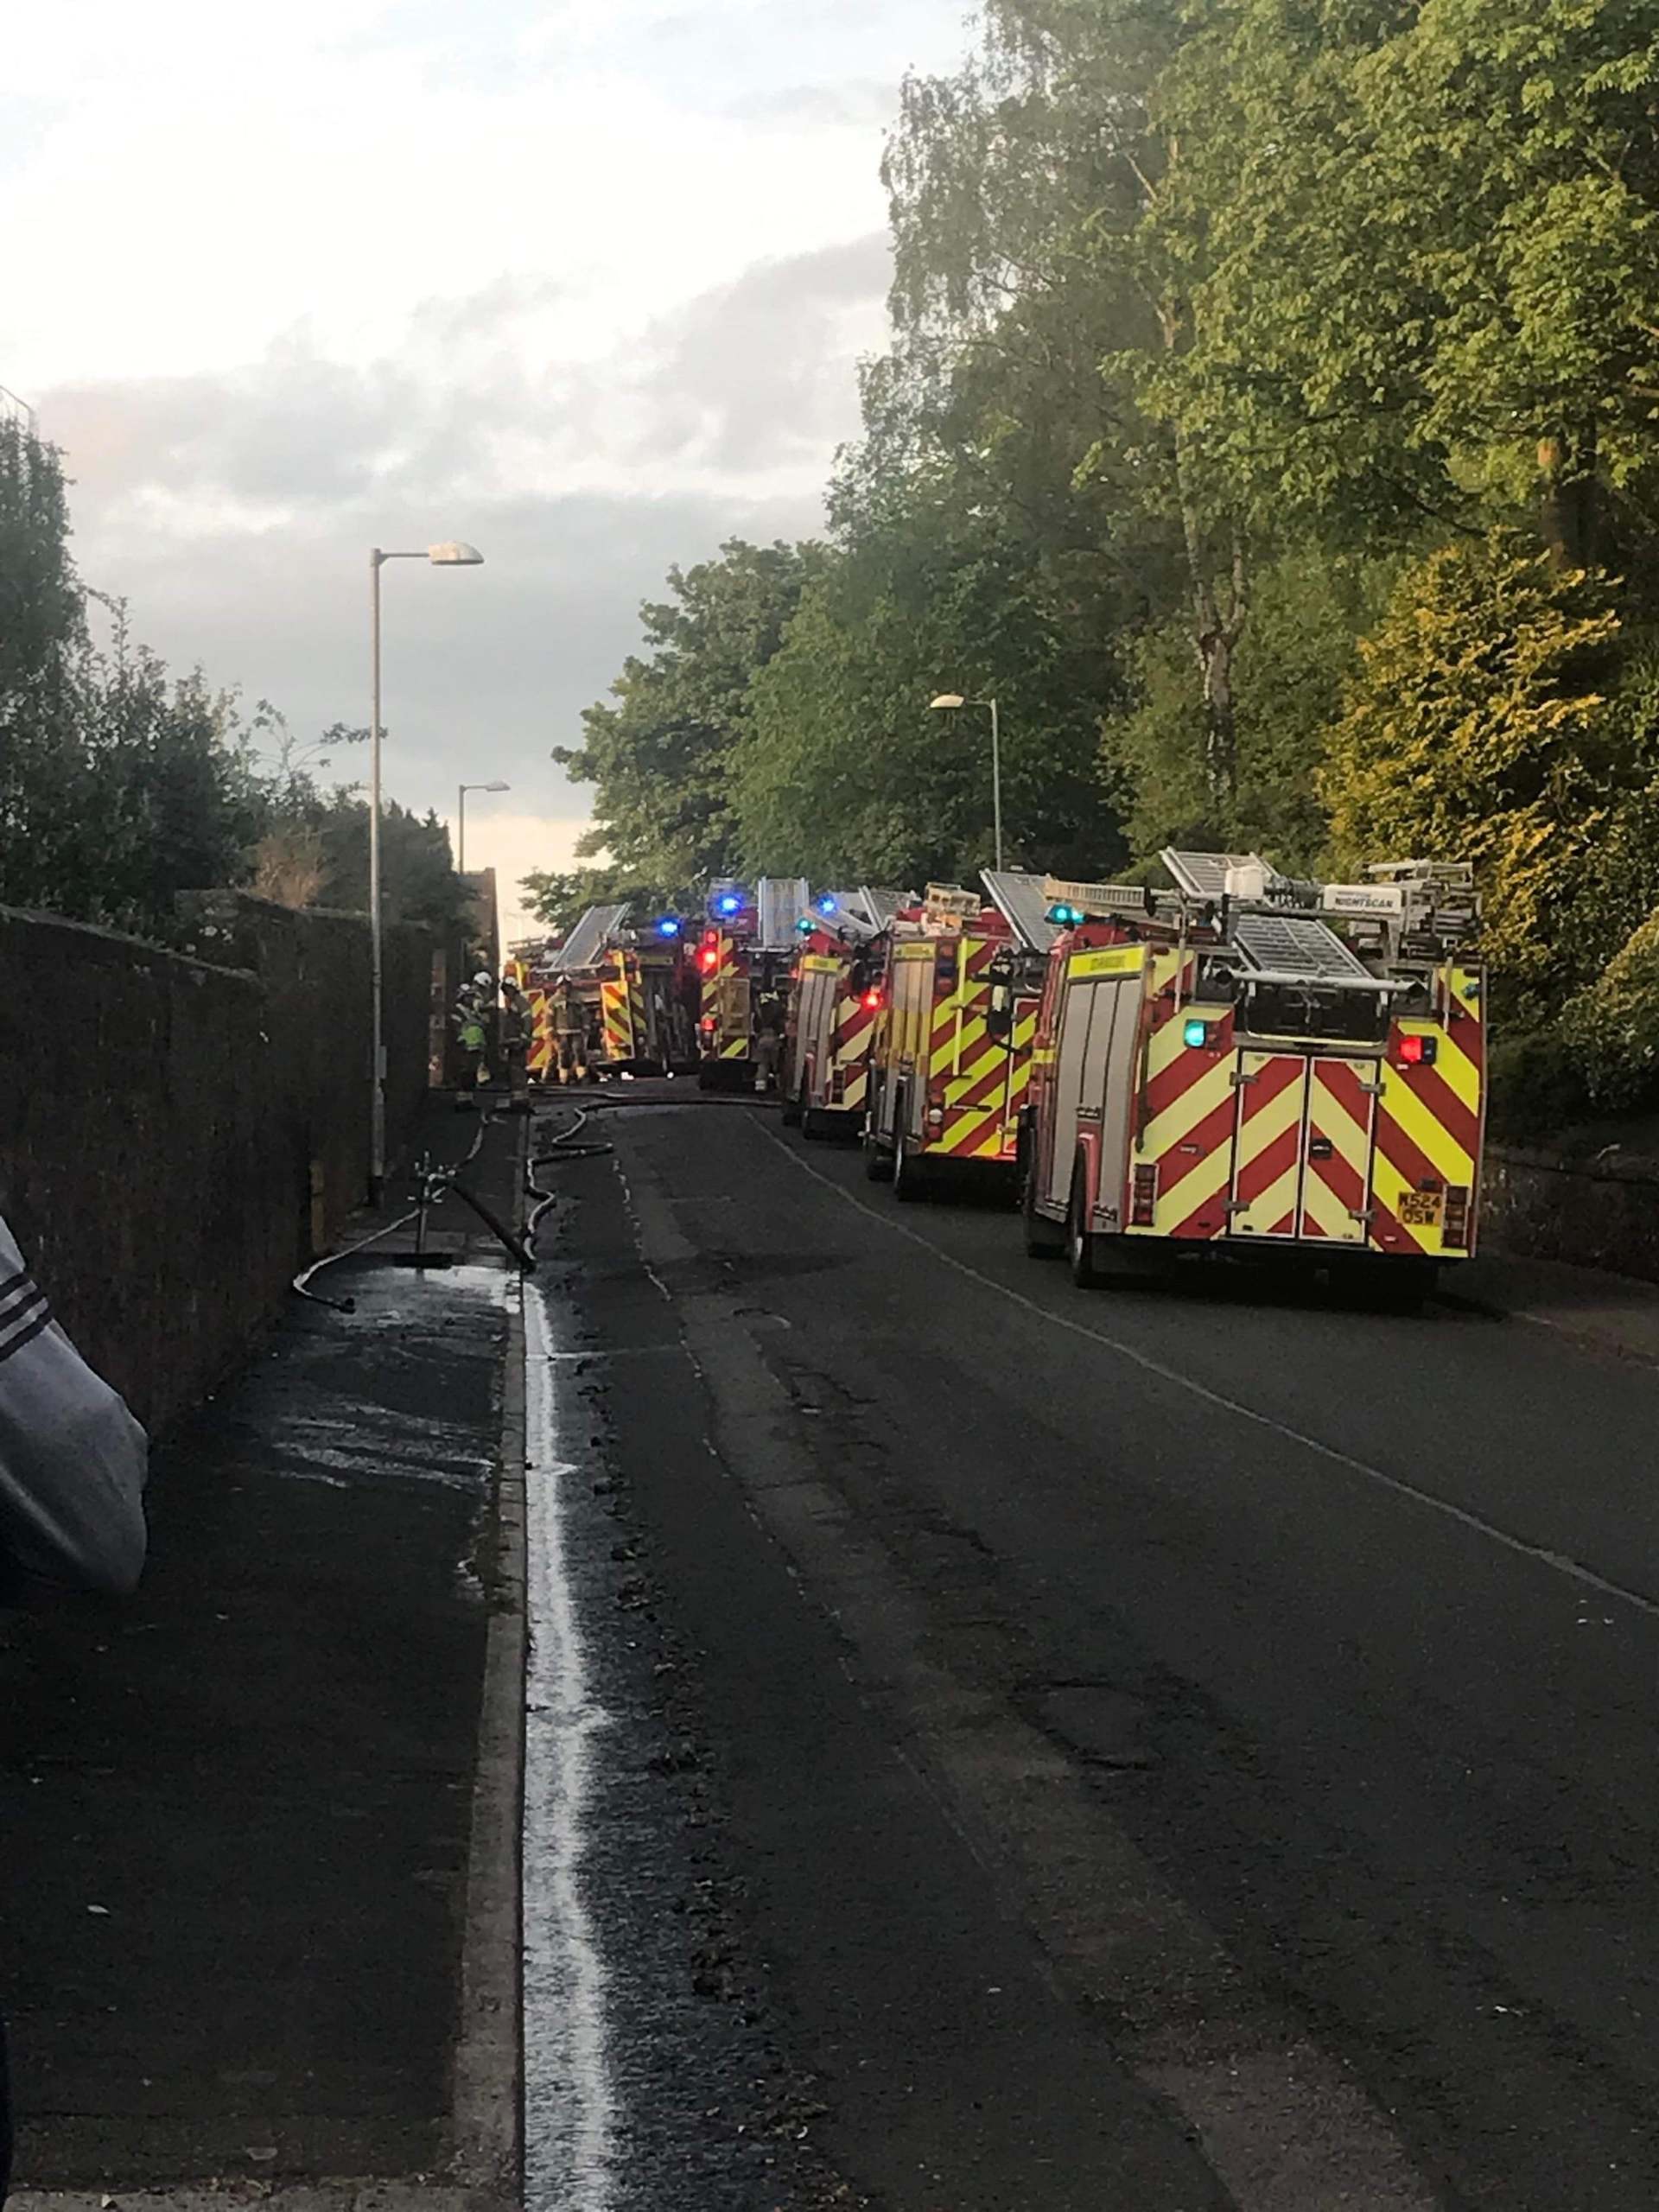 Fire crews were called to tackle the blaze at the former convent in Dumfries.